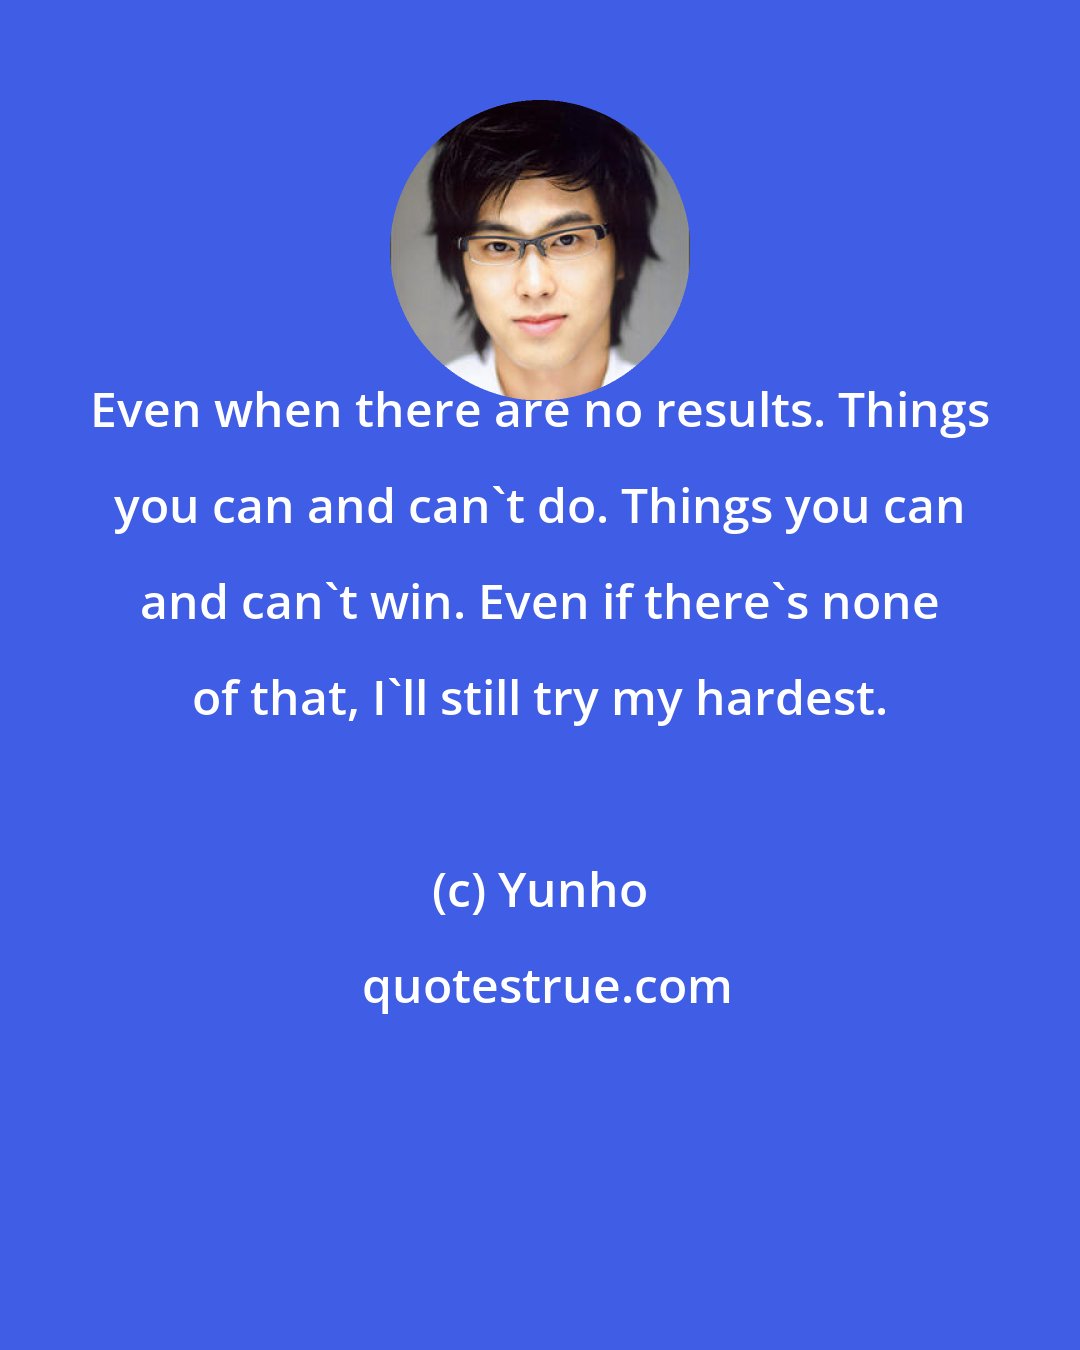 Yunho: Even when there are no results. Things you can and can't do. Things you can and can't win. Even if there's none of that, I'll still try my hardest.